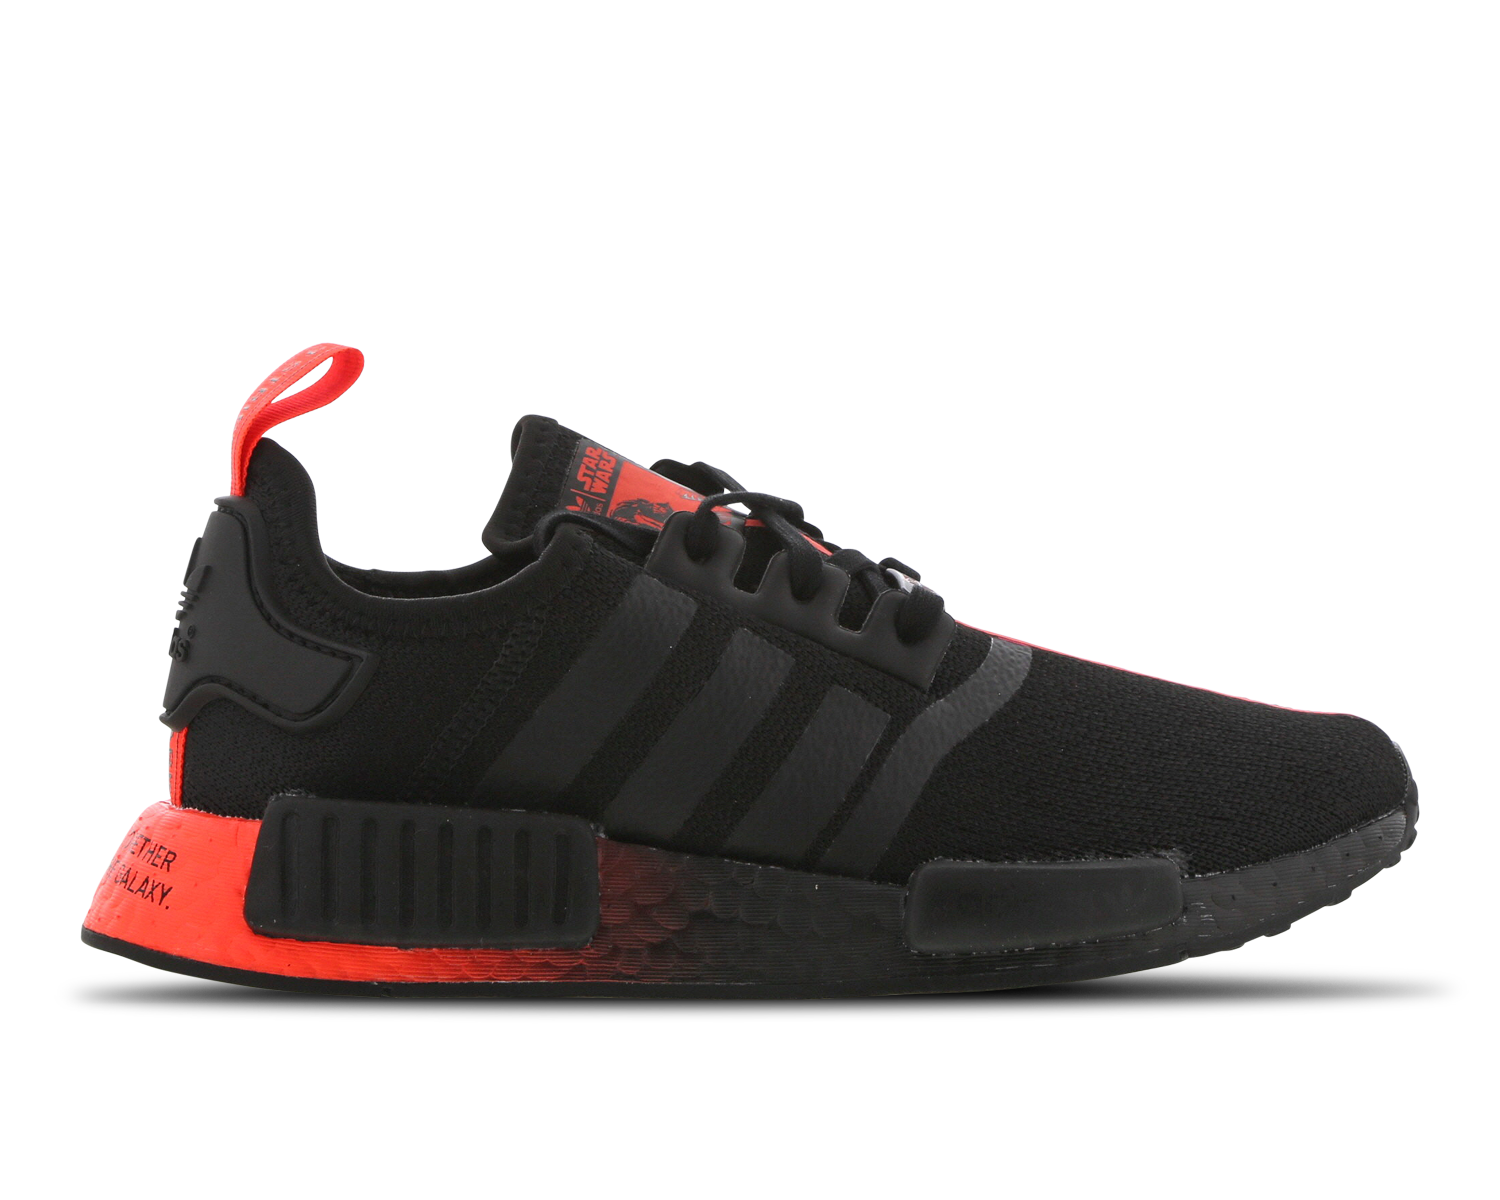 Adidas nmd ri exclusive nmd r1 316543 from klekt